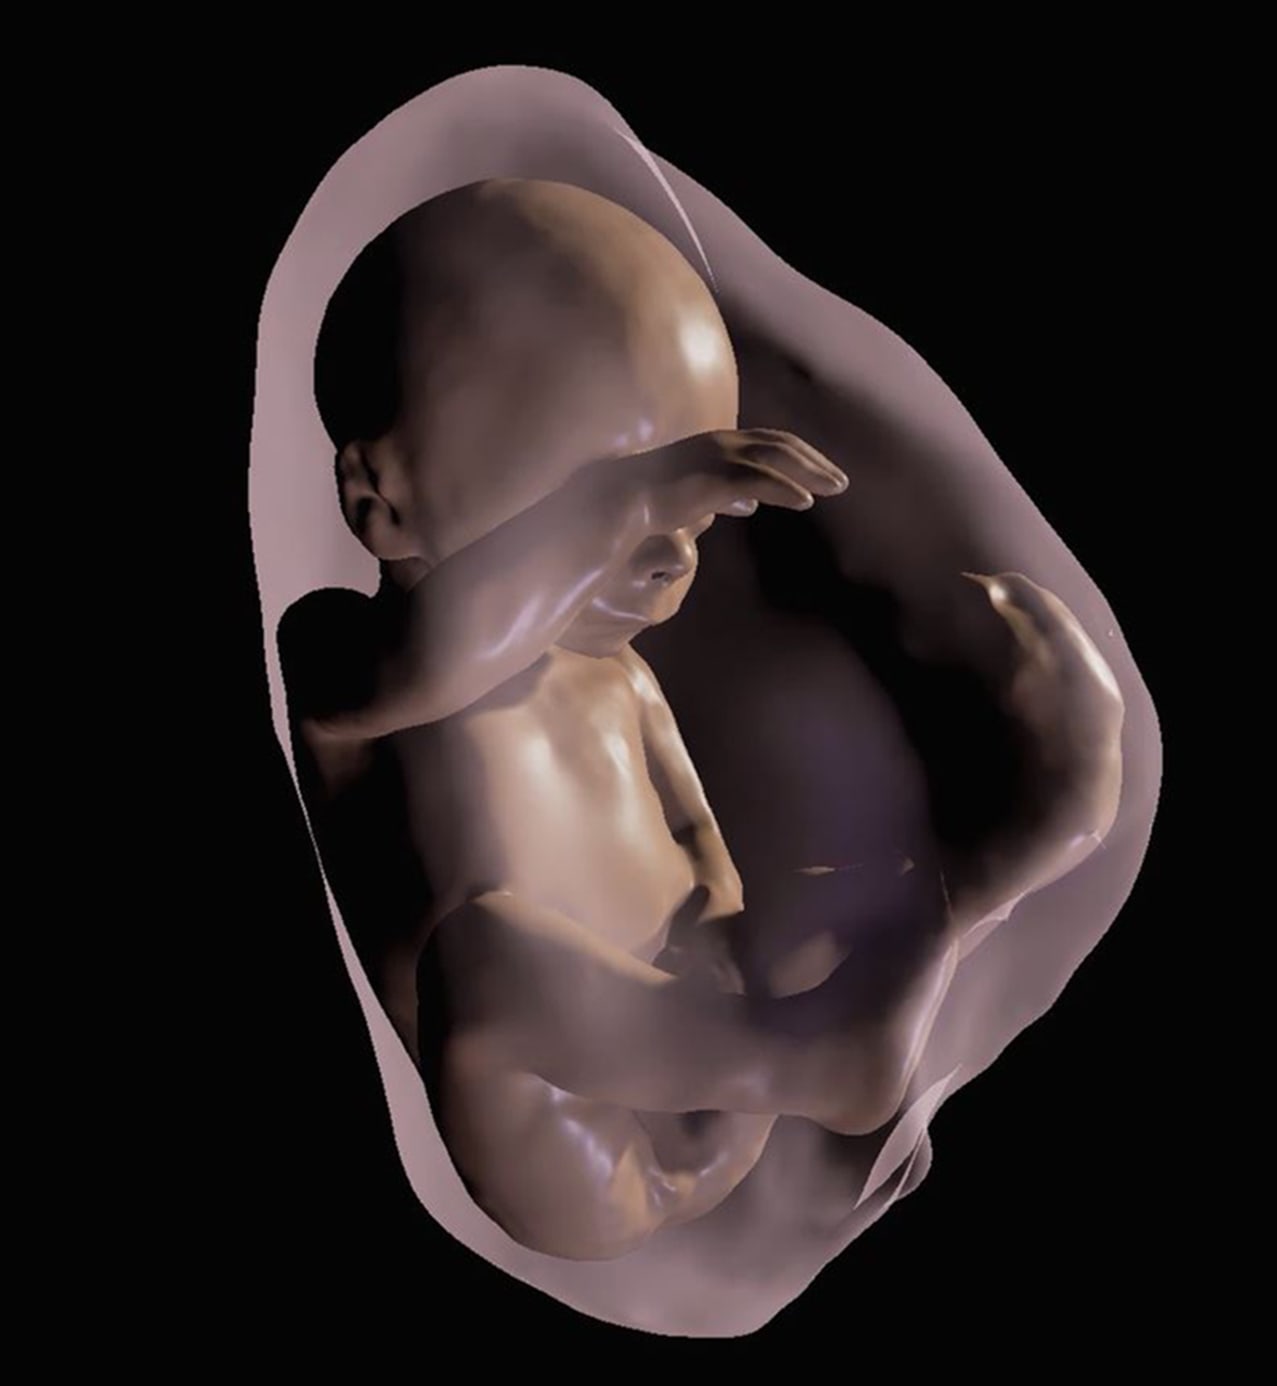 photos taken inside the womb